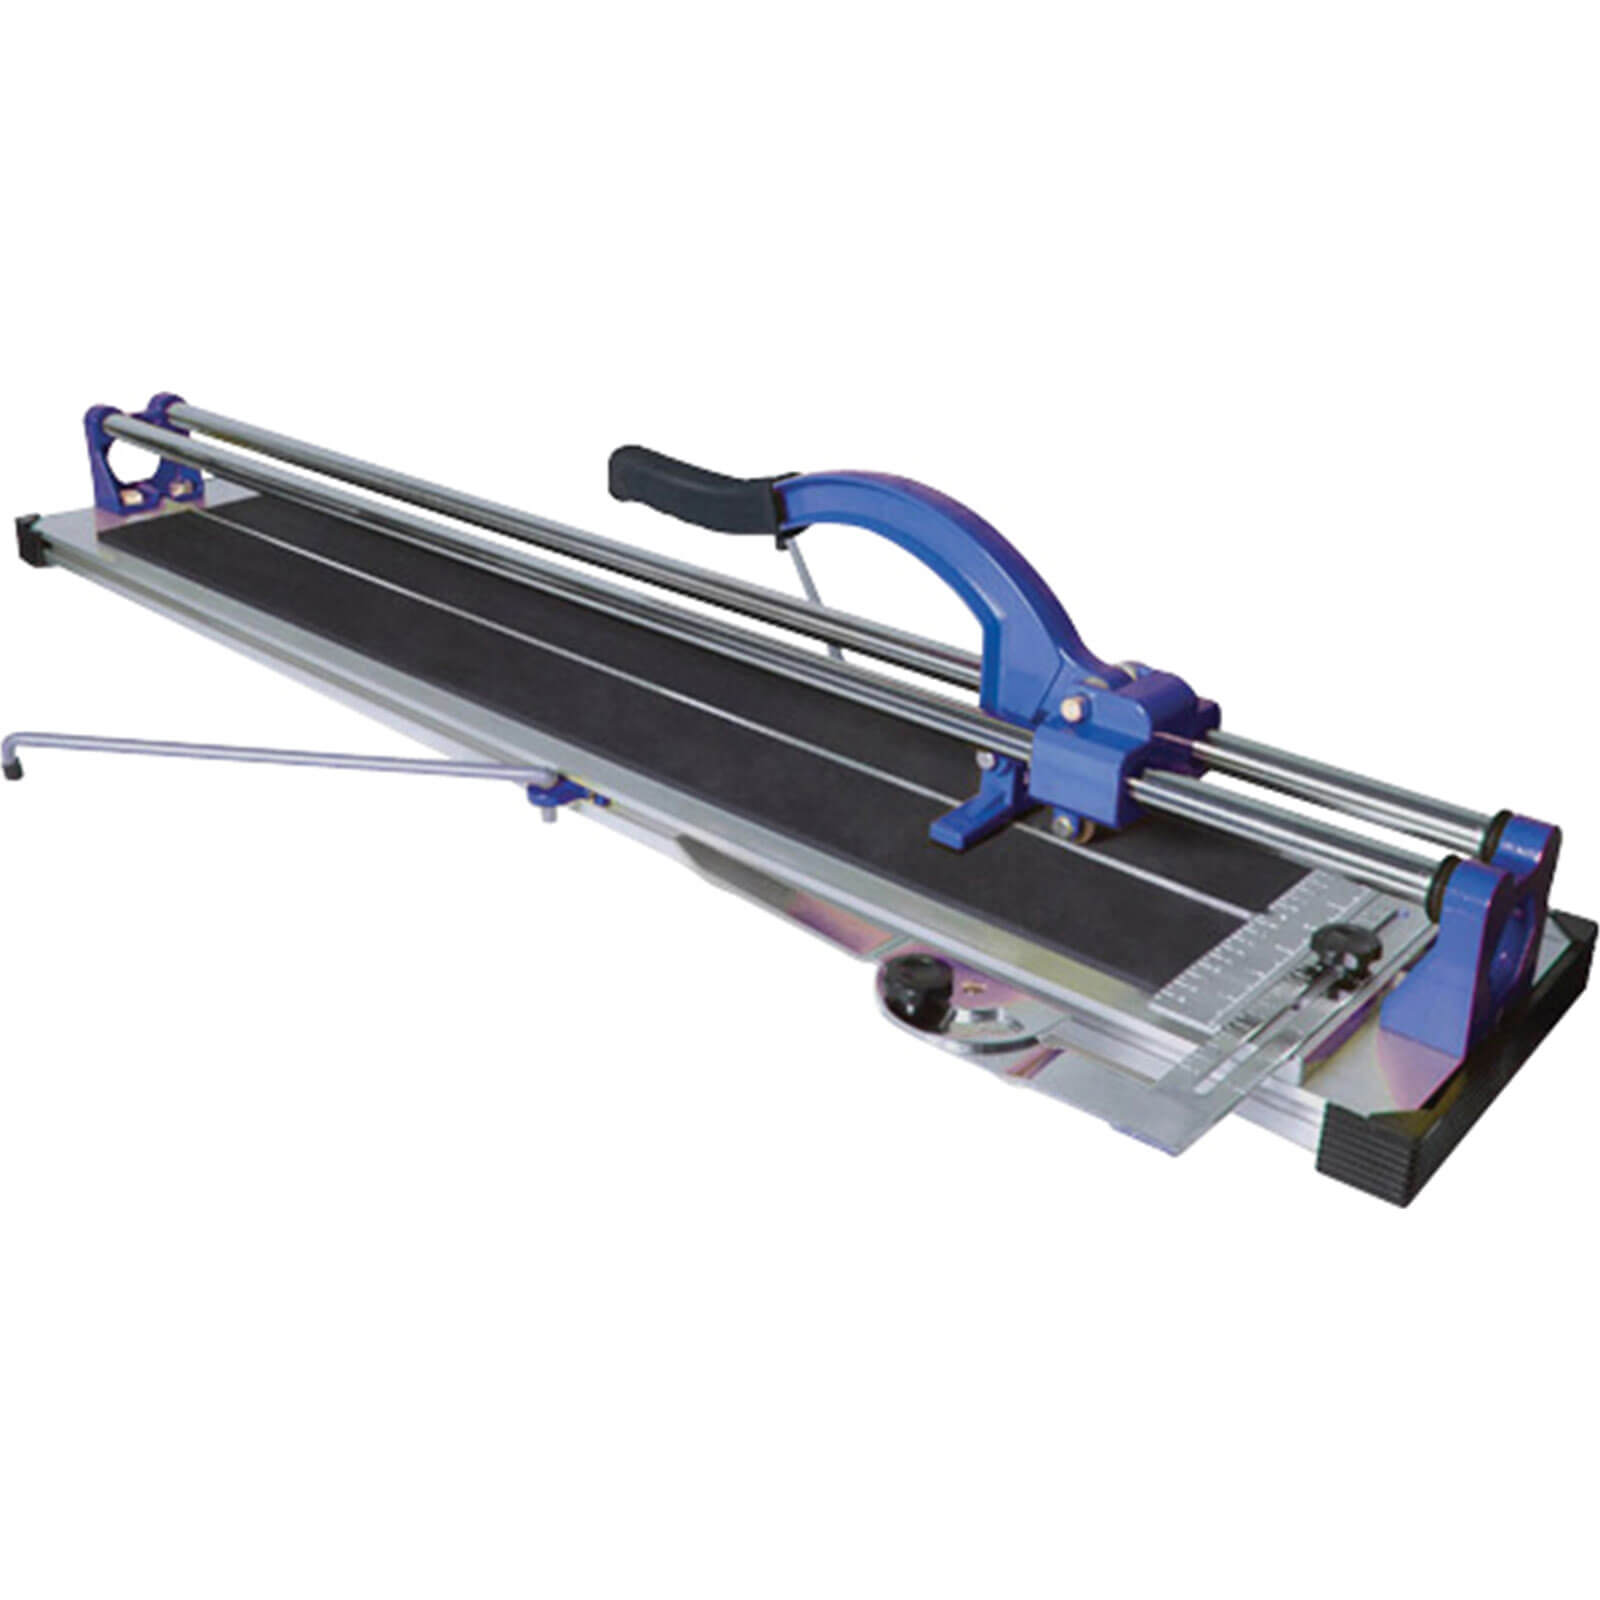 Photo of Vitrex Pro Flat Bed Tile Cutter